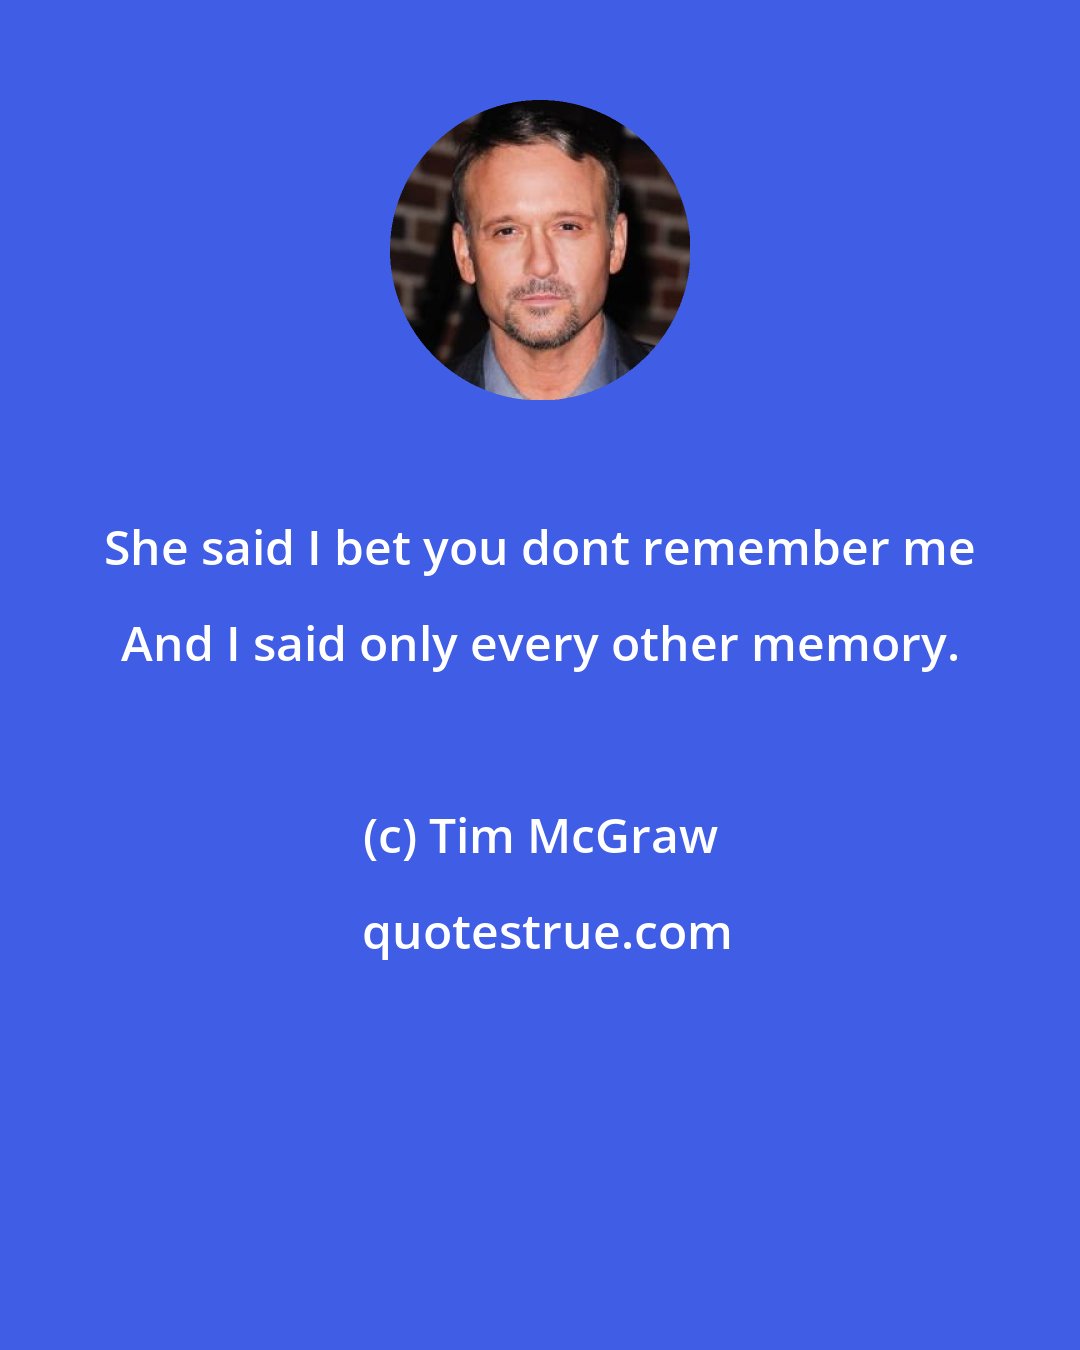 Tim McGraw: She said I bet you dont remember me And I said only every other memory.